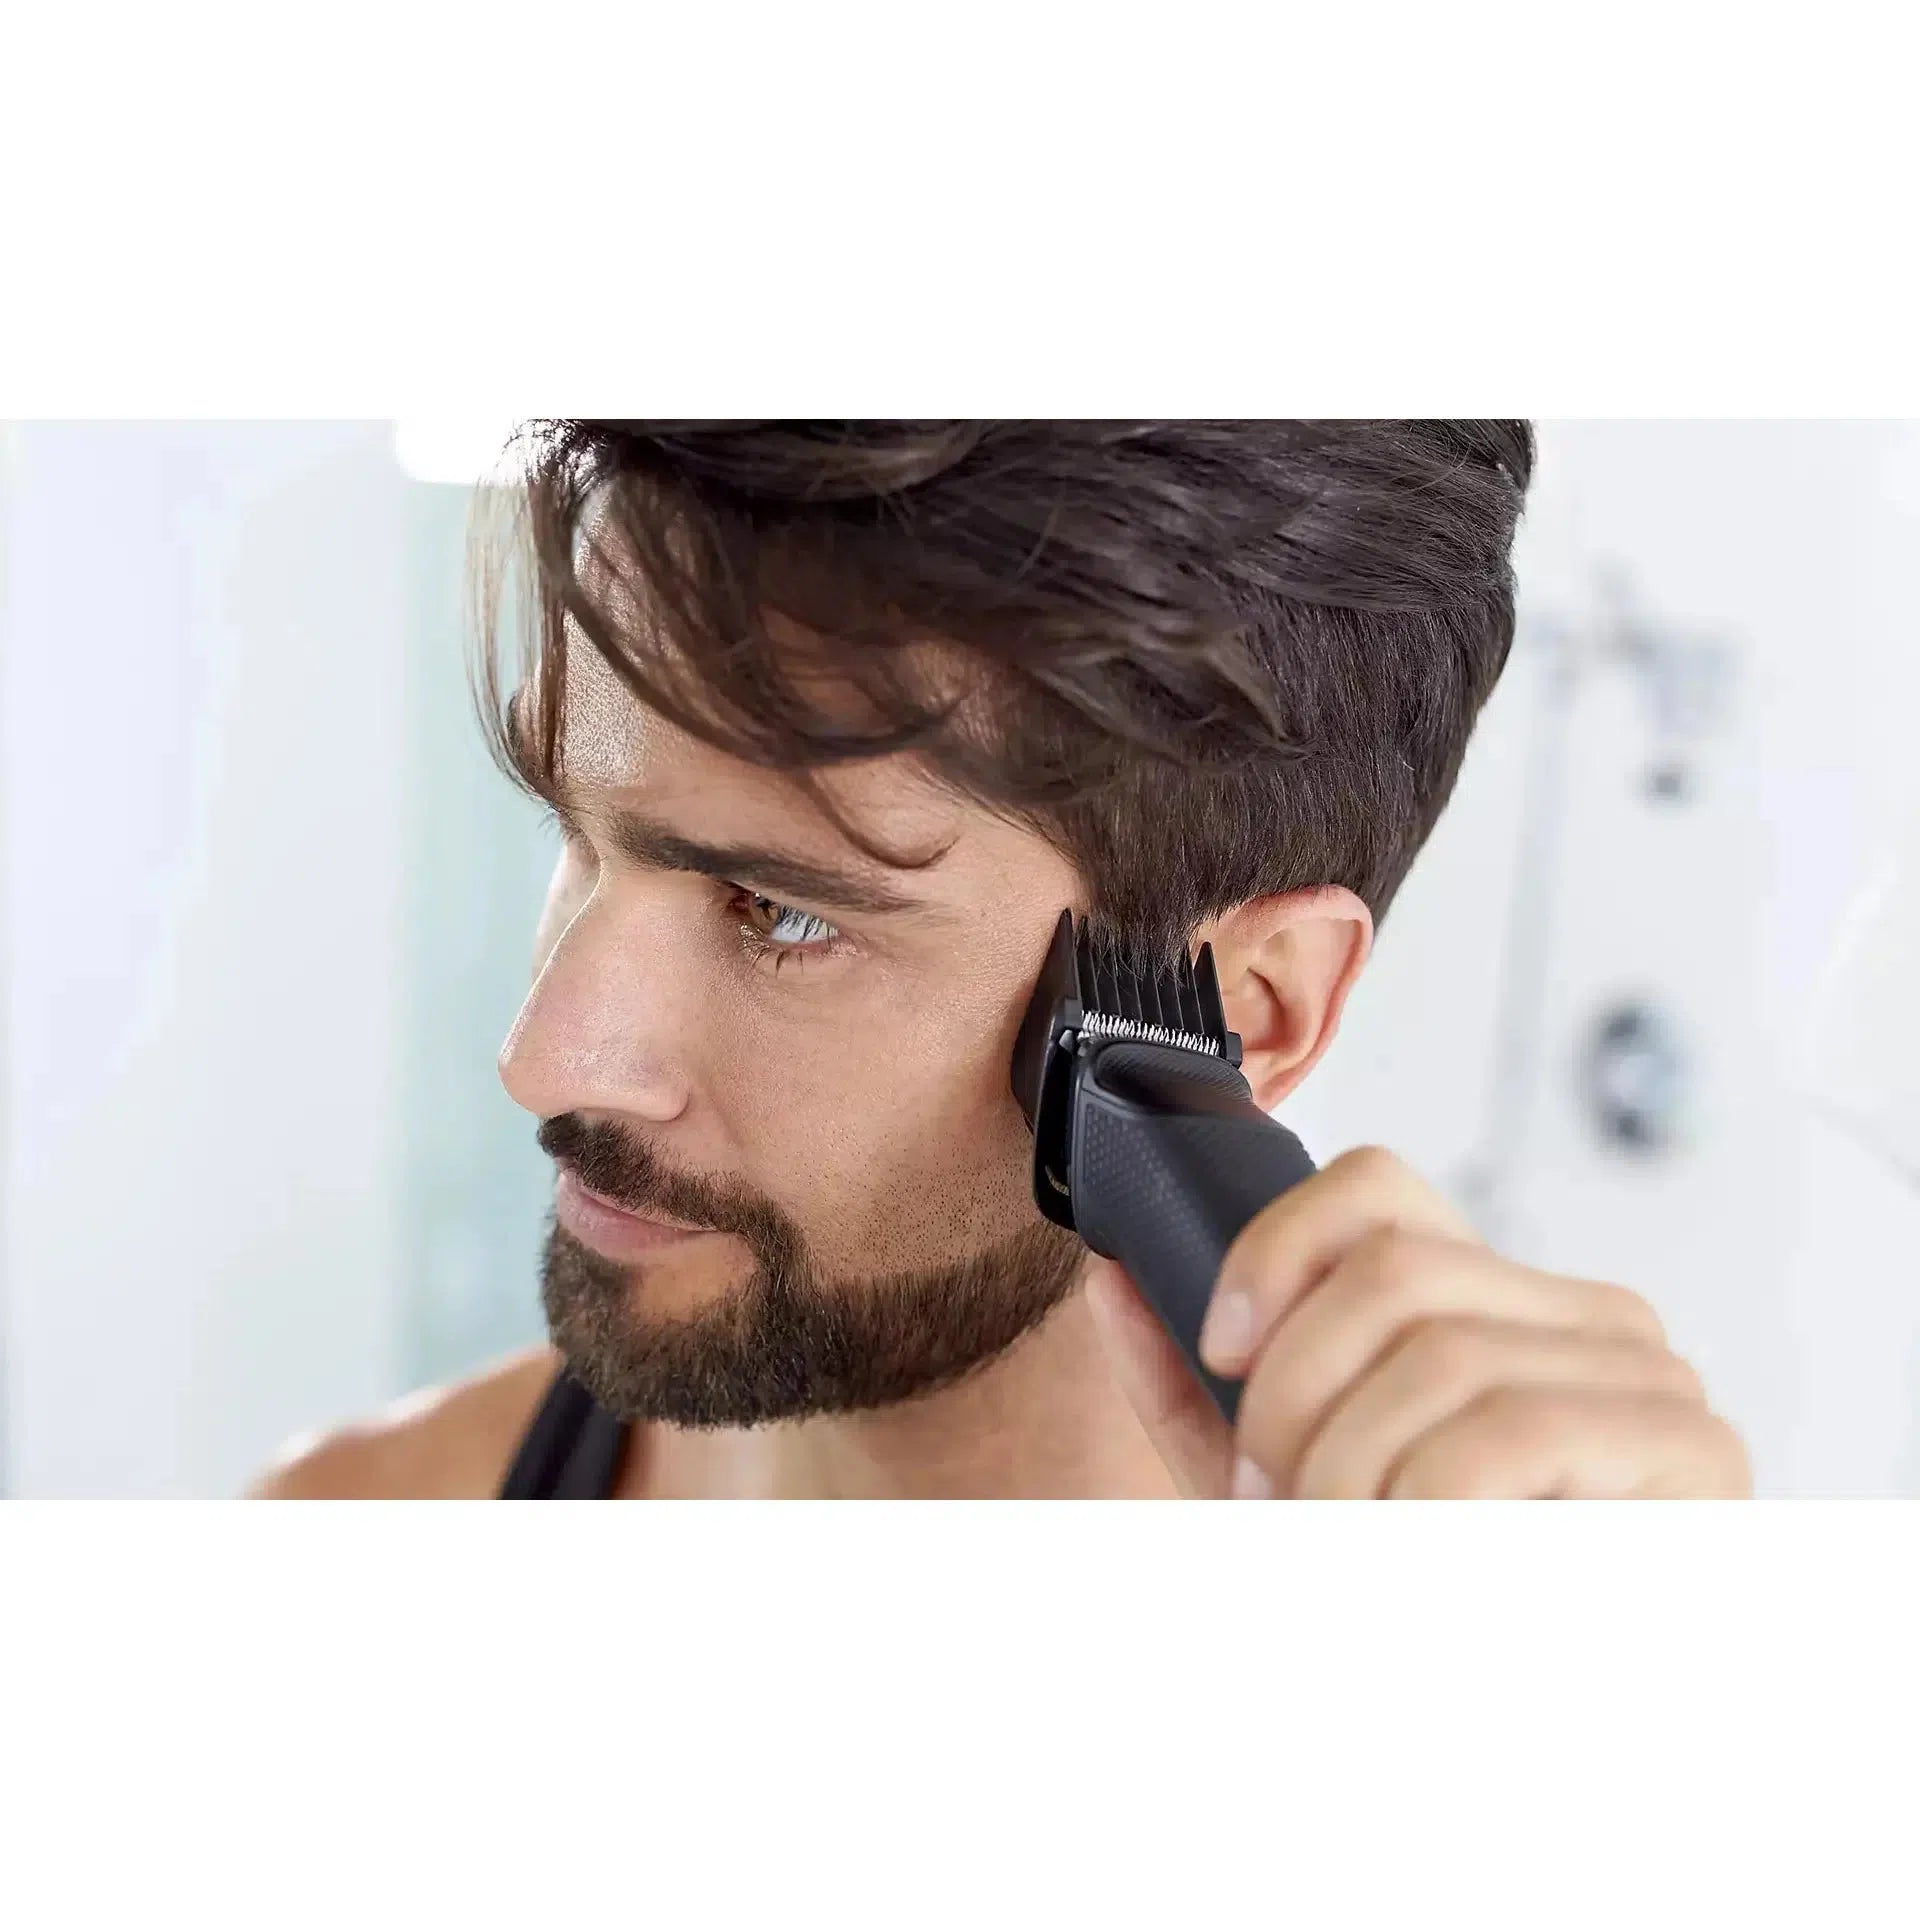 Philips MG5730/15 Multigroom Series 5000 Shaver - 11-in-1 Face , Body and Hair Trimmer